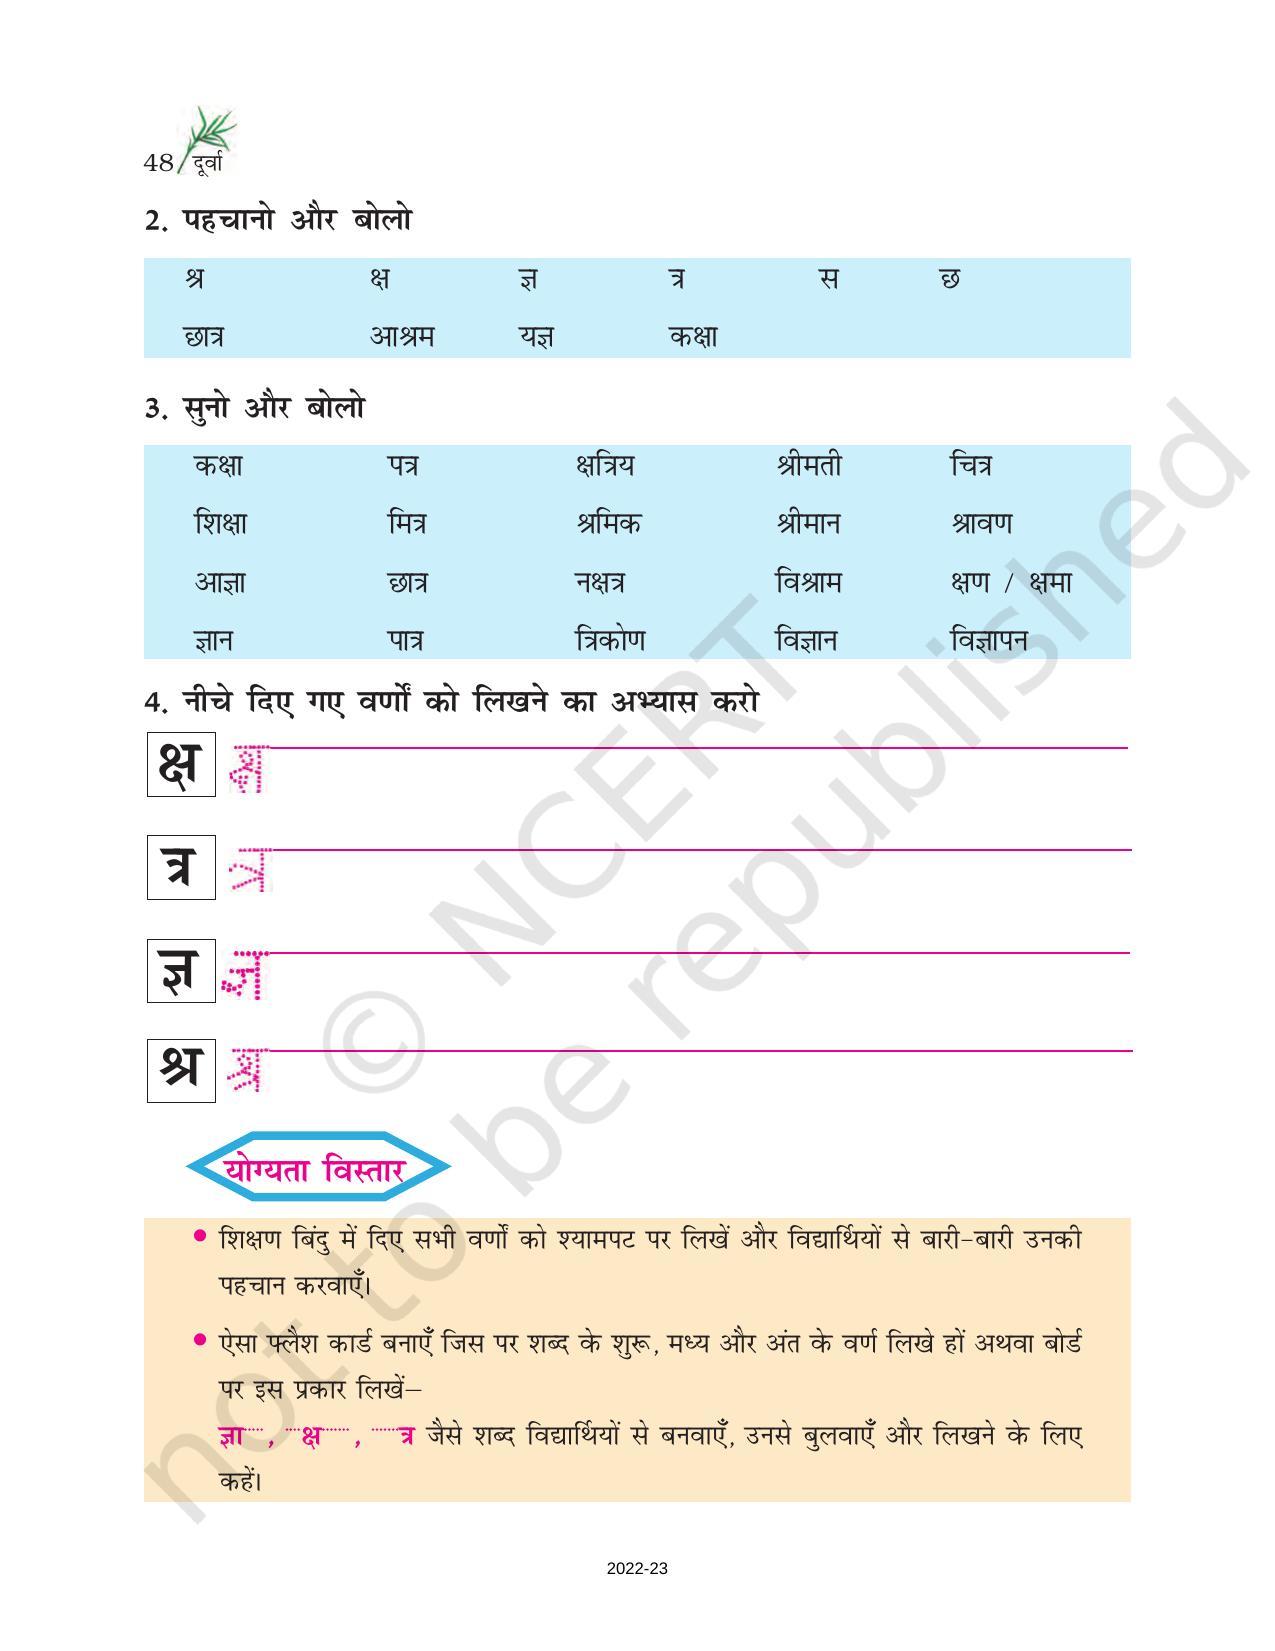 NCERT Book for Class 6 Hindi(Doorva Part 1) : Chapter 9-कक्षा - Page 2